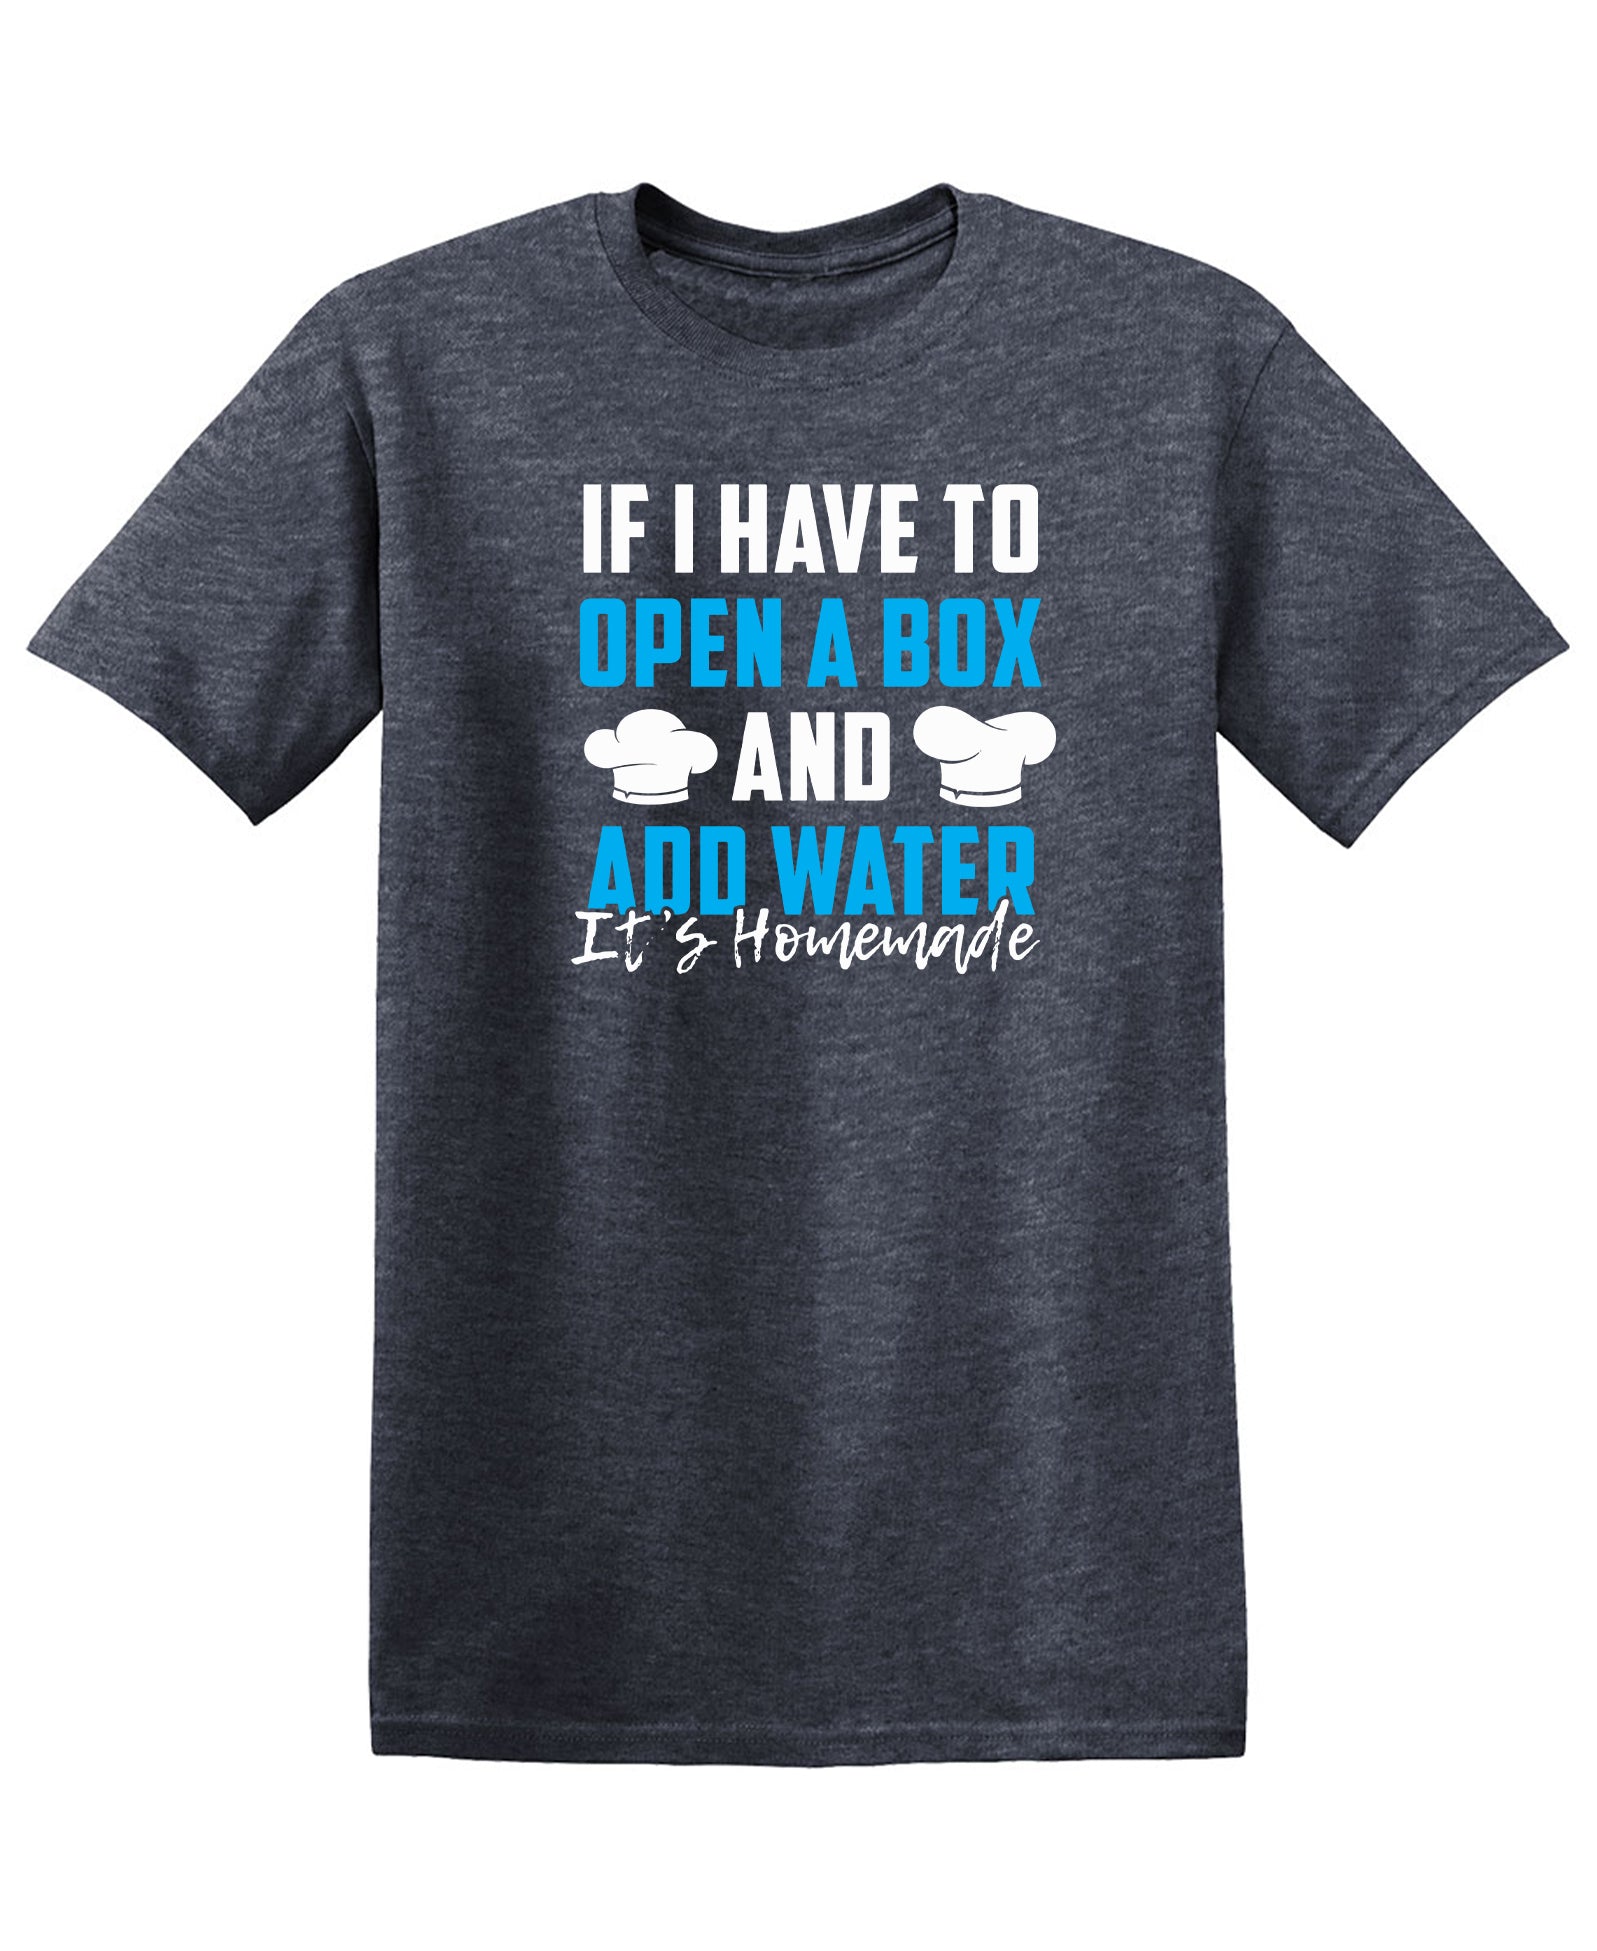 If I Have to Open a Box and Add Water, Its Homemade - Funny T Shirts & Graphic Tees